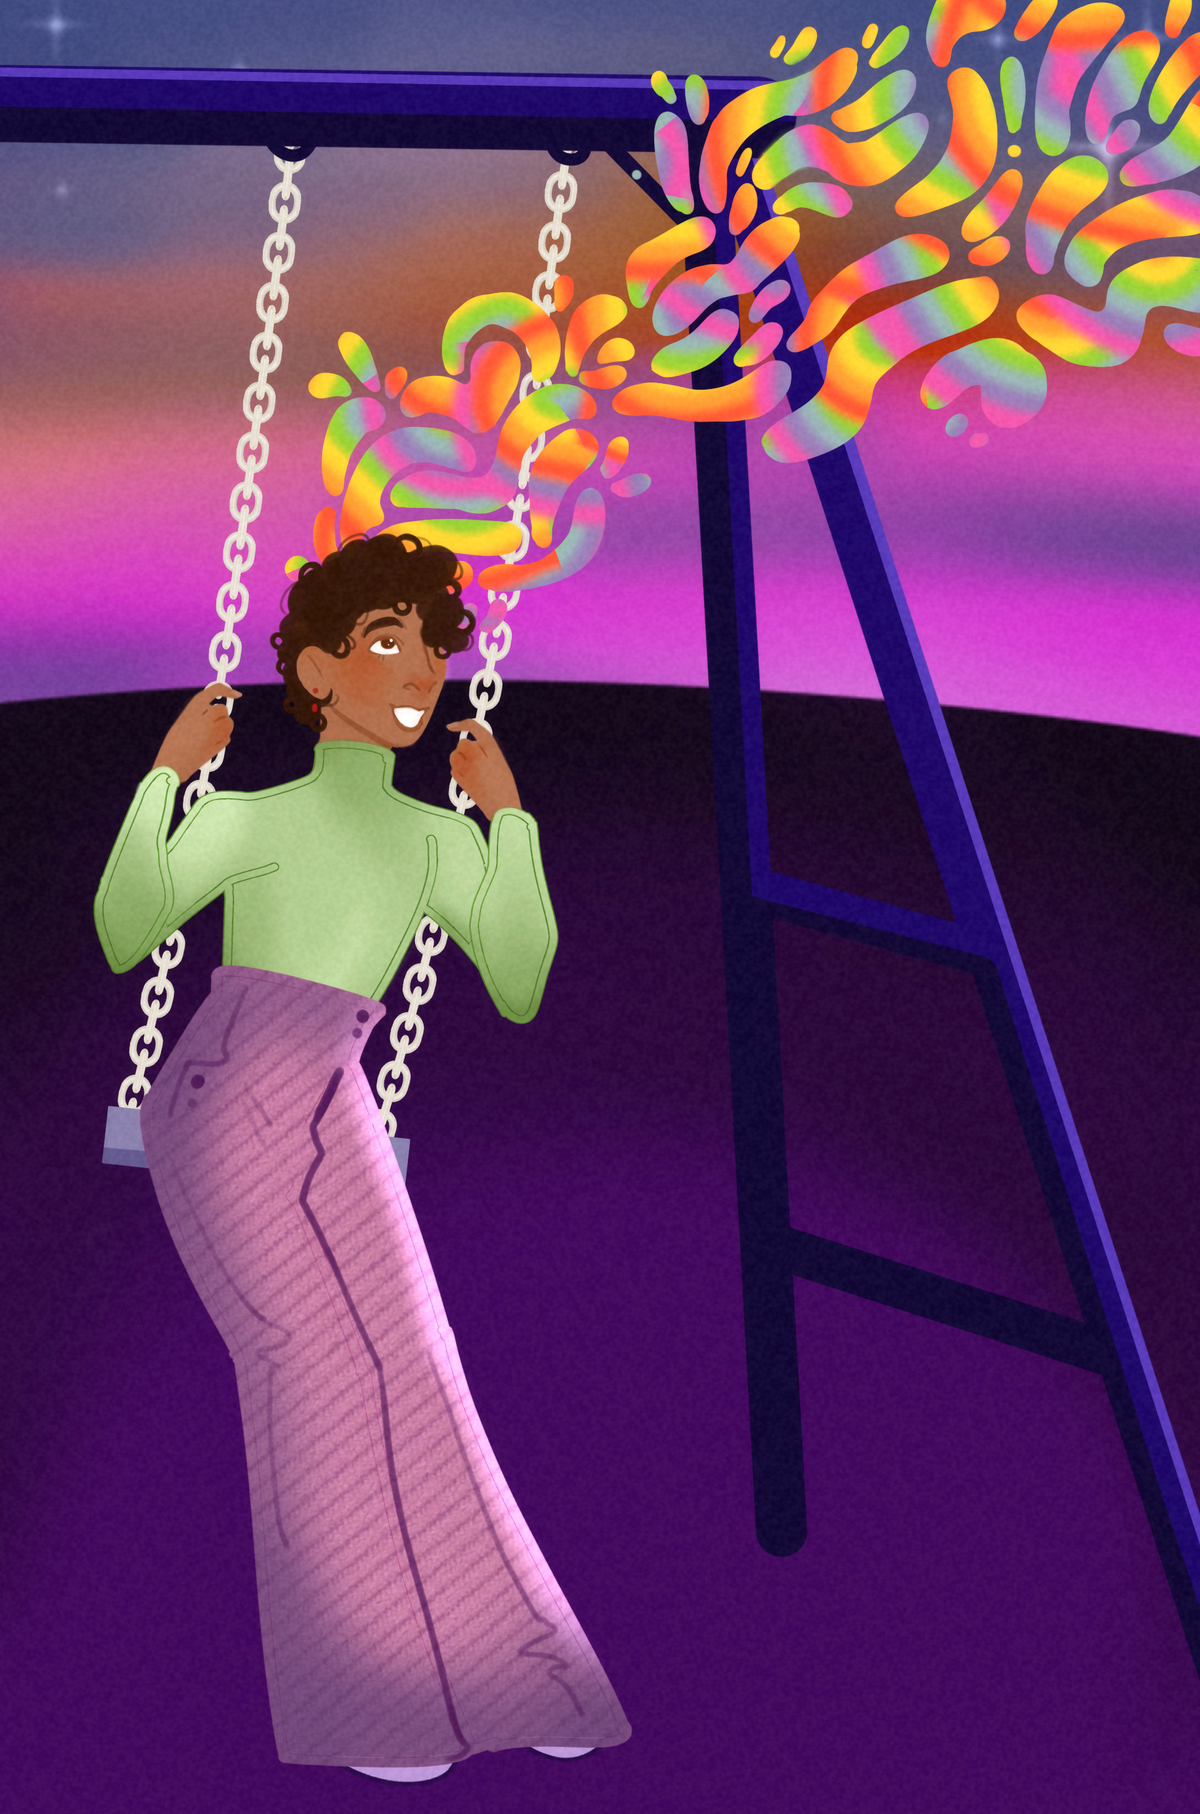 illustration of a nonbinary south asian person wearing a bright green turtleneck sweater and purple pants. they swing on a swing set and smile up into the dusk sky, rainbow shapes emanating from their head into the night.